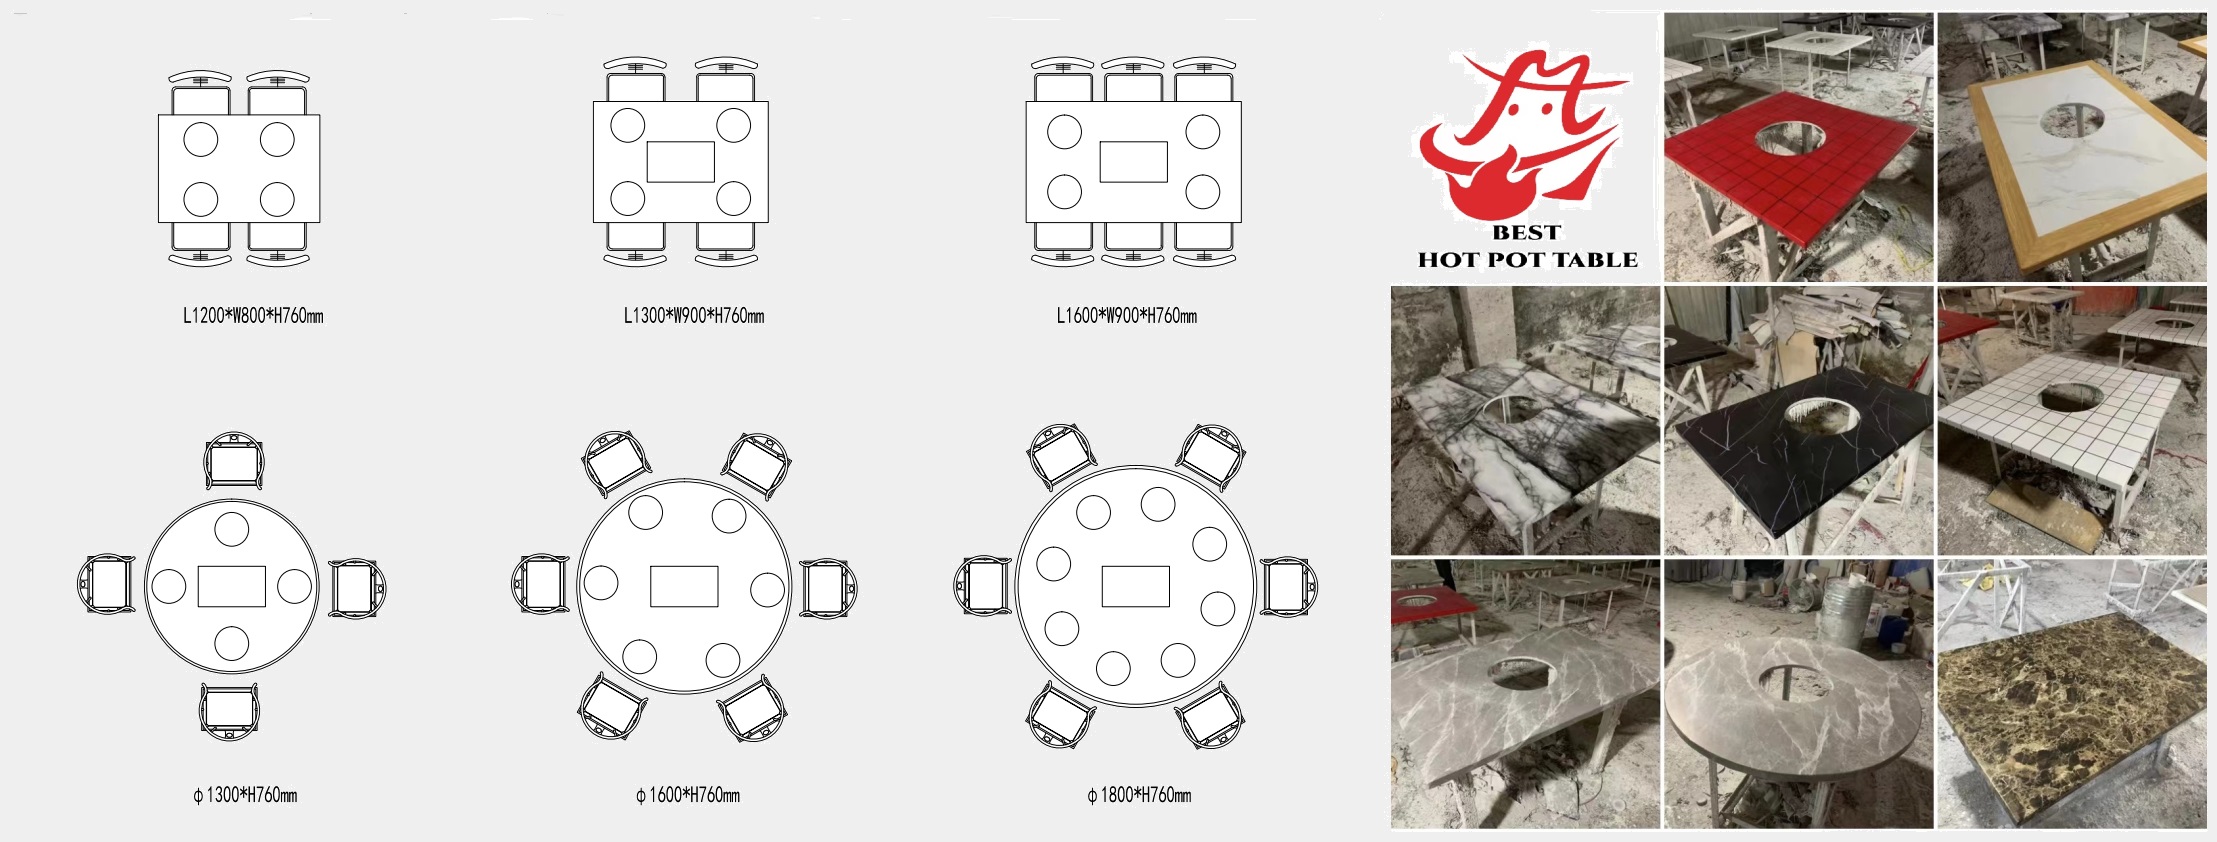 hot pot table size